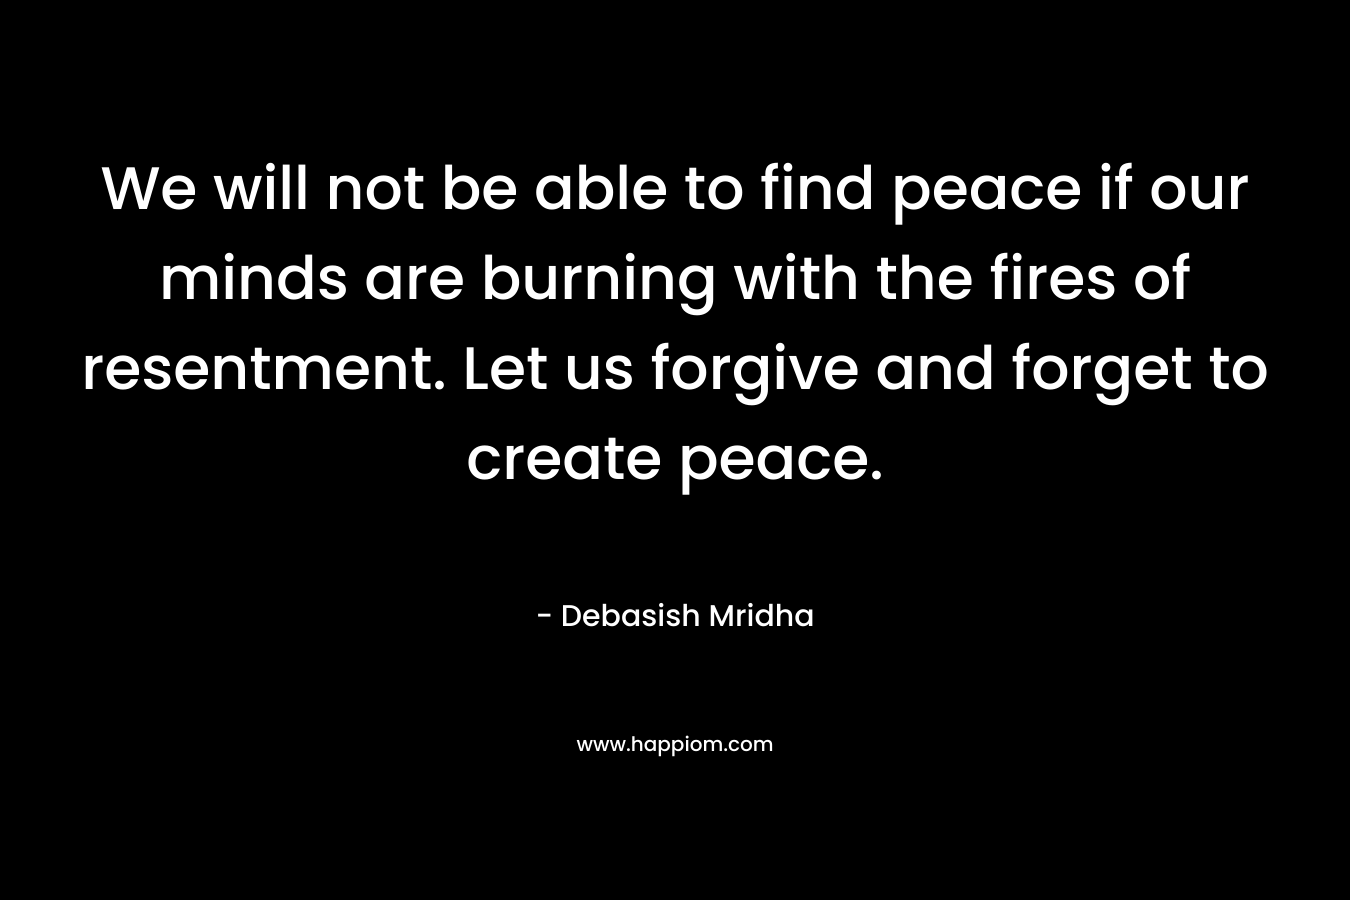 We will not be able to find peace if our minds are burning with the fires of resentment. Let us forgive and forget to create peace.